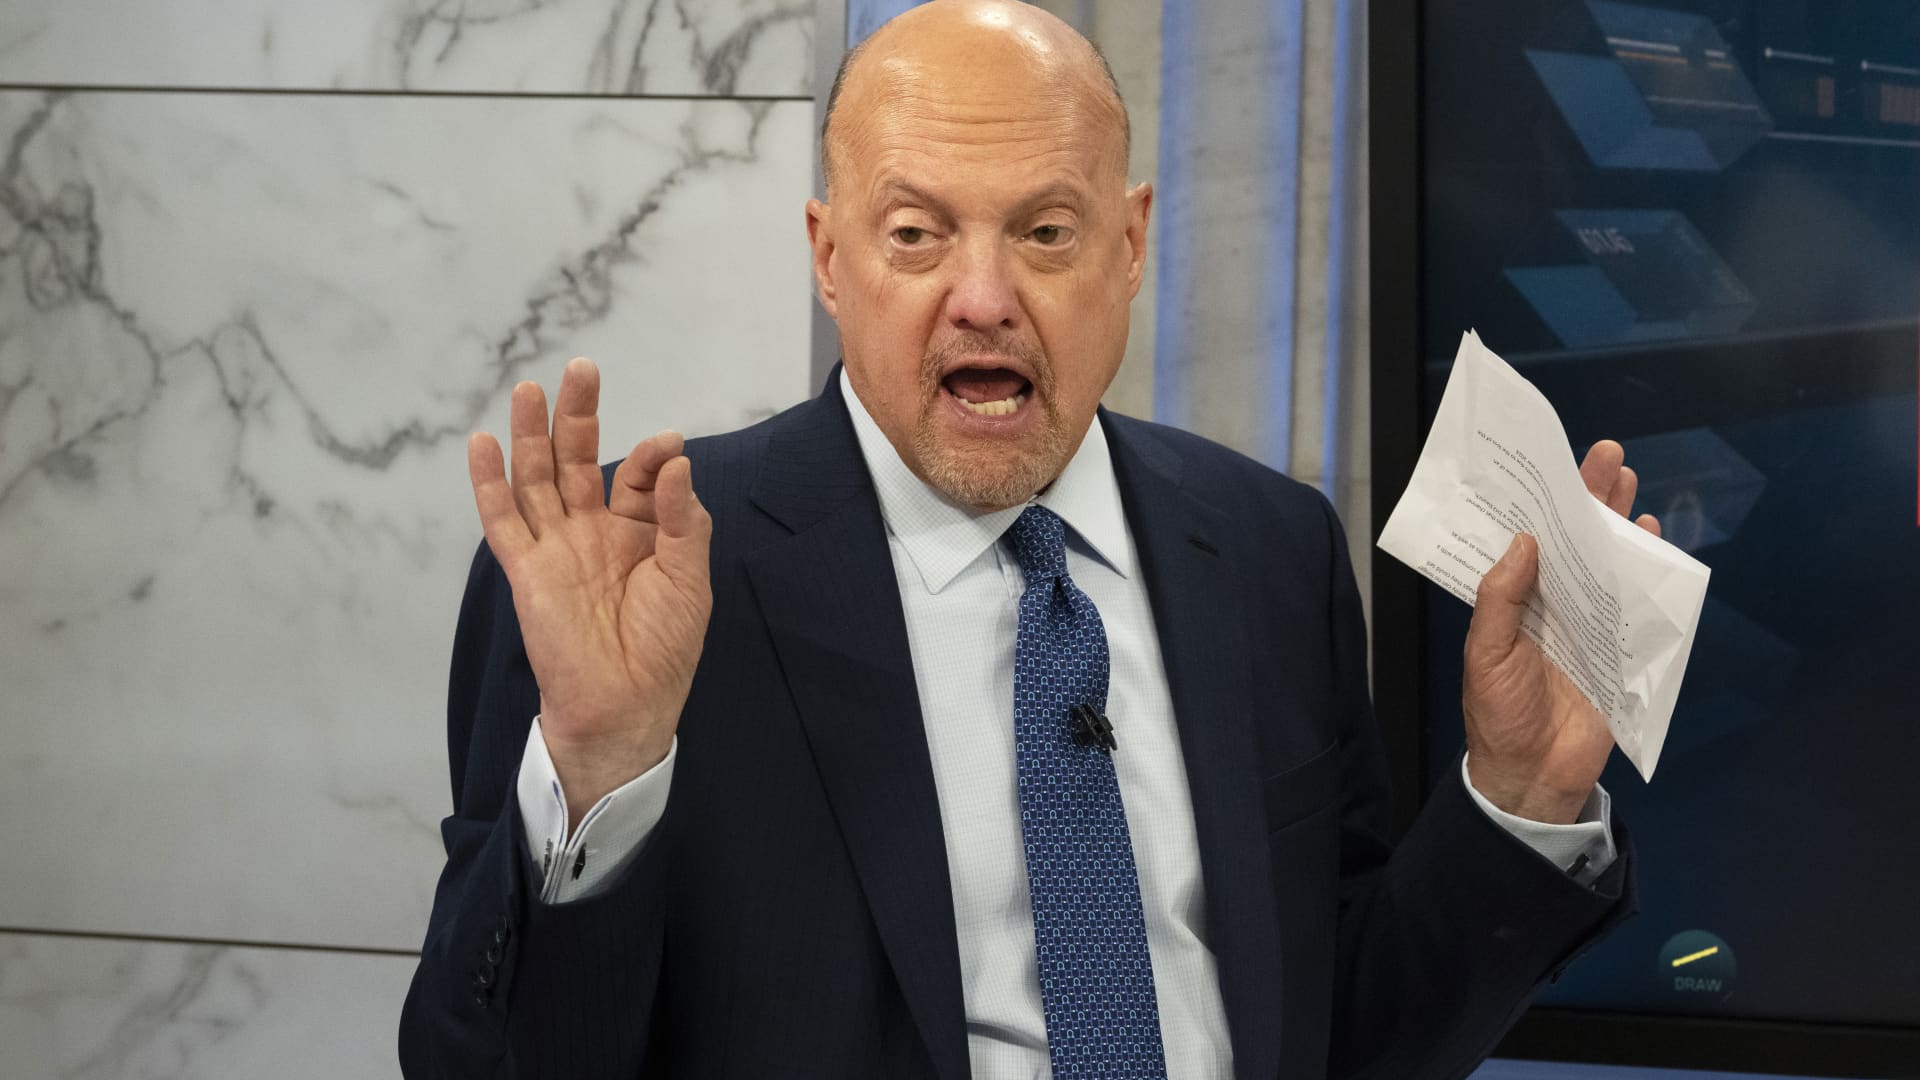 Jim Cramer's top 10 things to watch in the market Friday: Jobs way up, stocks down, tech tough